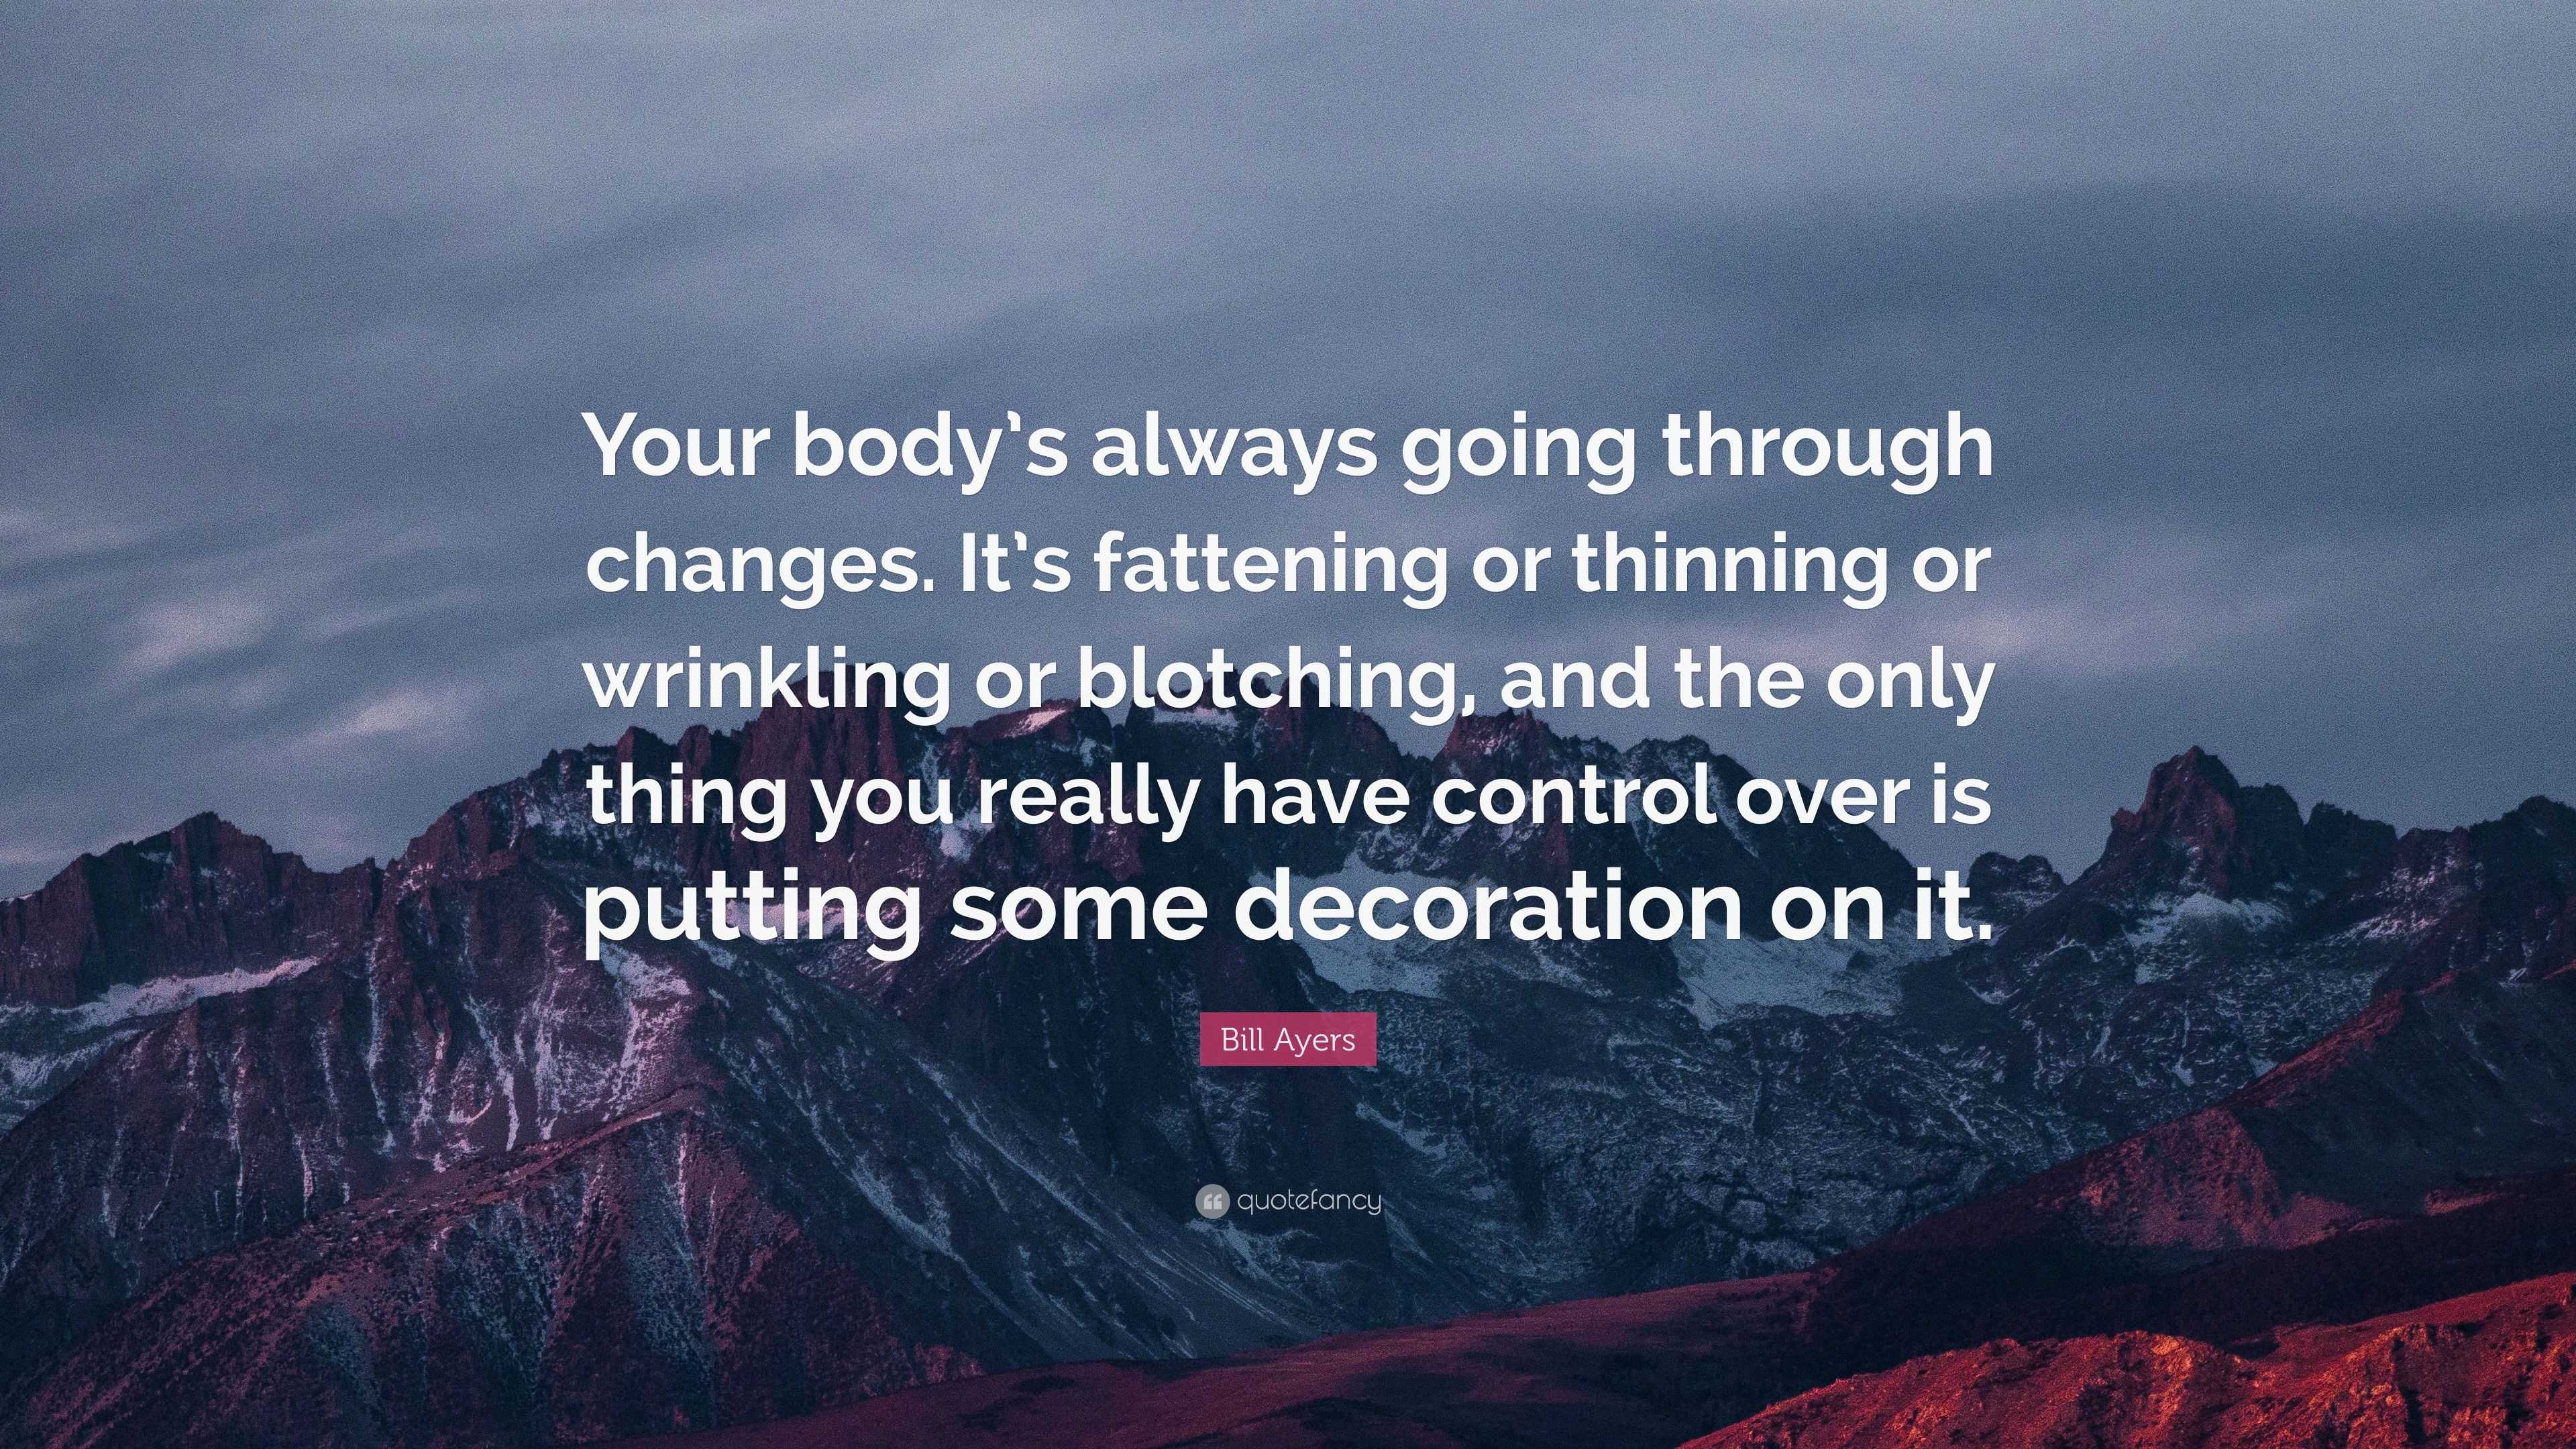 Bill Ayers Quote: “Your body’s always going through changes. It’s ...